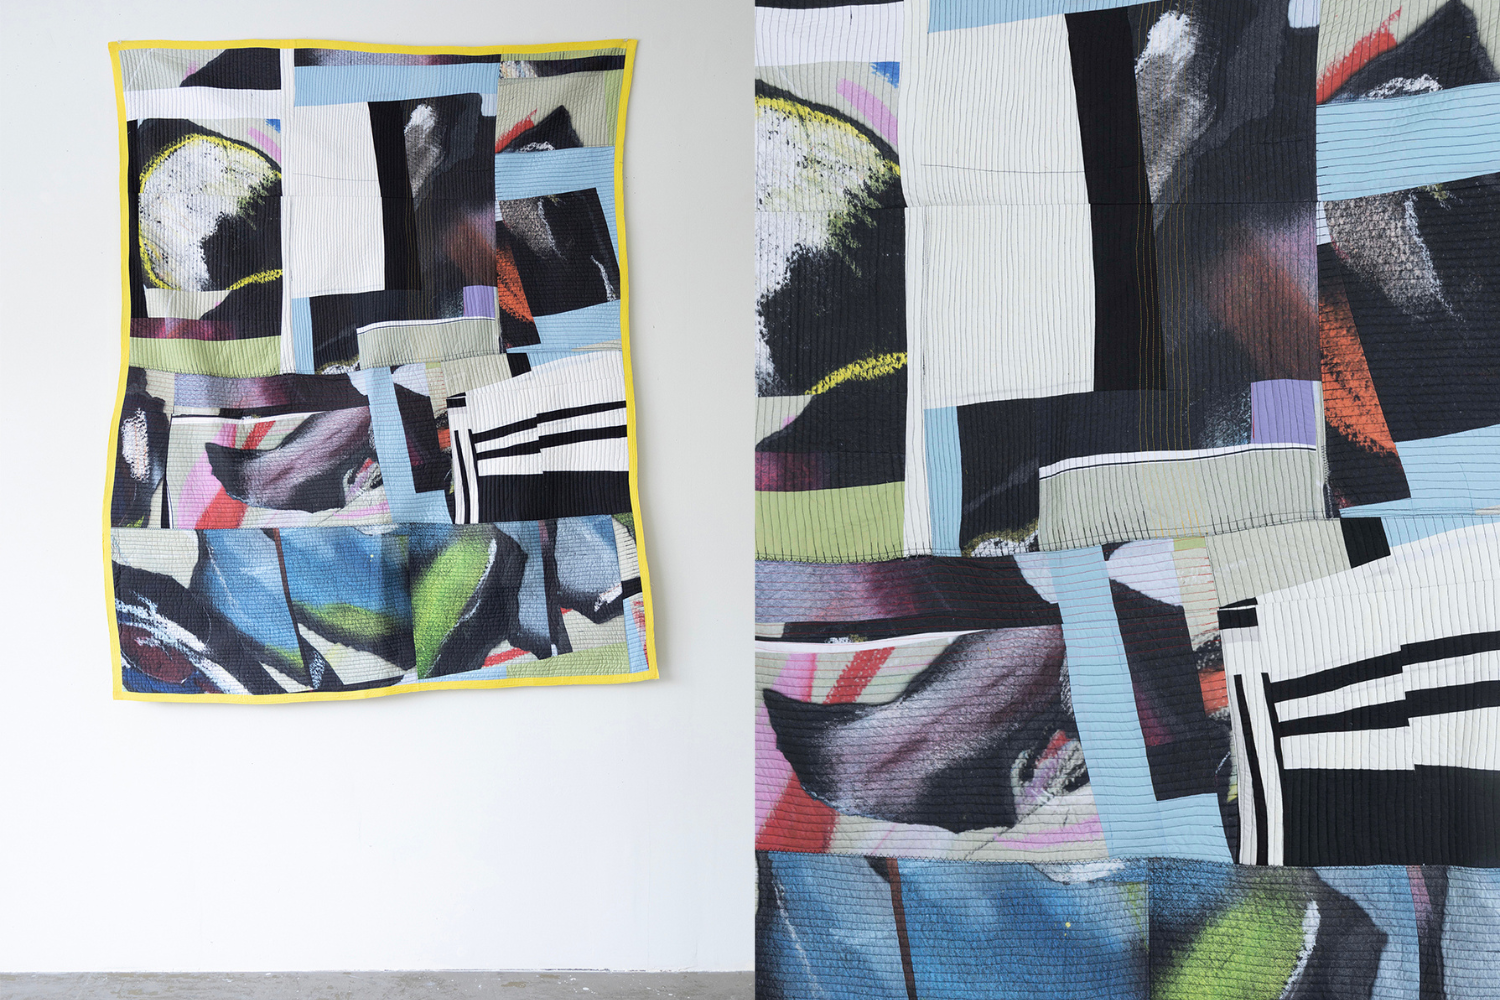 On the left side of the image, is a photo of a quilt against a white wall. The quilt has a thin yellow border and thick rows of fabric featuring an abstract design with partial petal like shapes in blue, green and purple that start out thick but taper off at the top. Some blocks are black and white, others light blue. The right side of the image is a close up photo of the quilt.